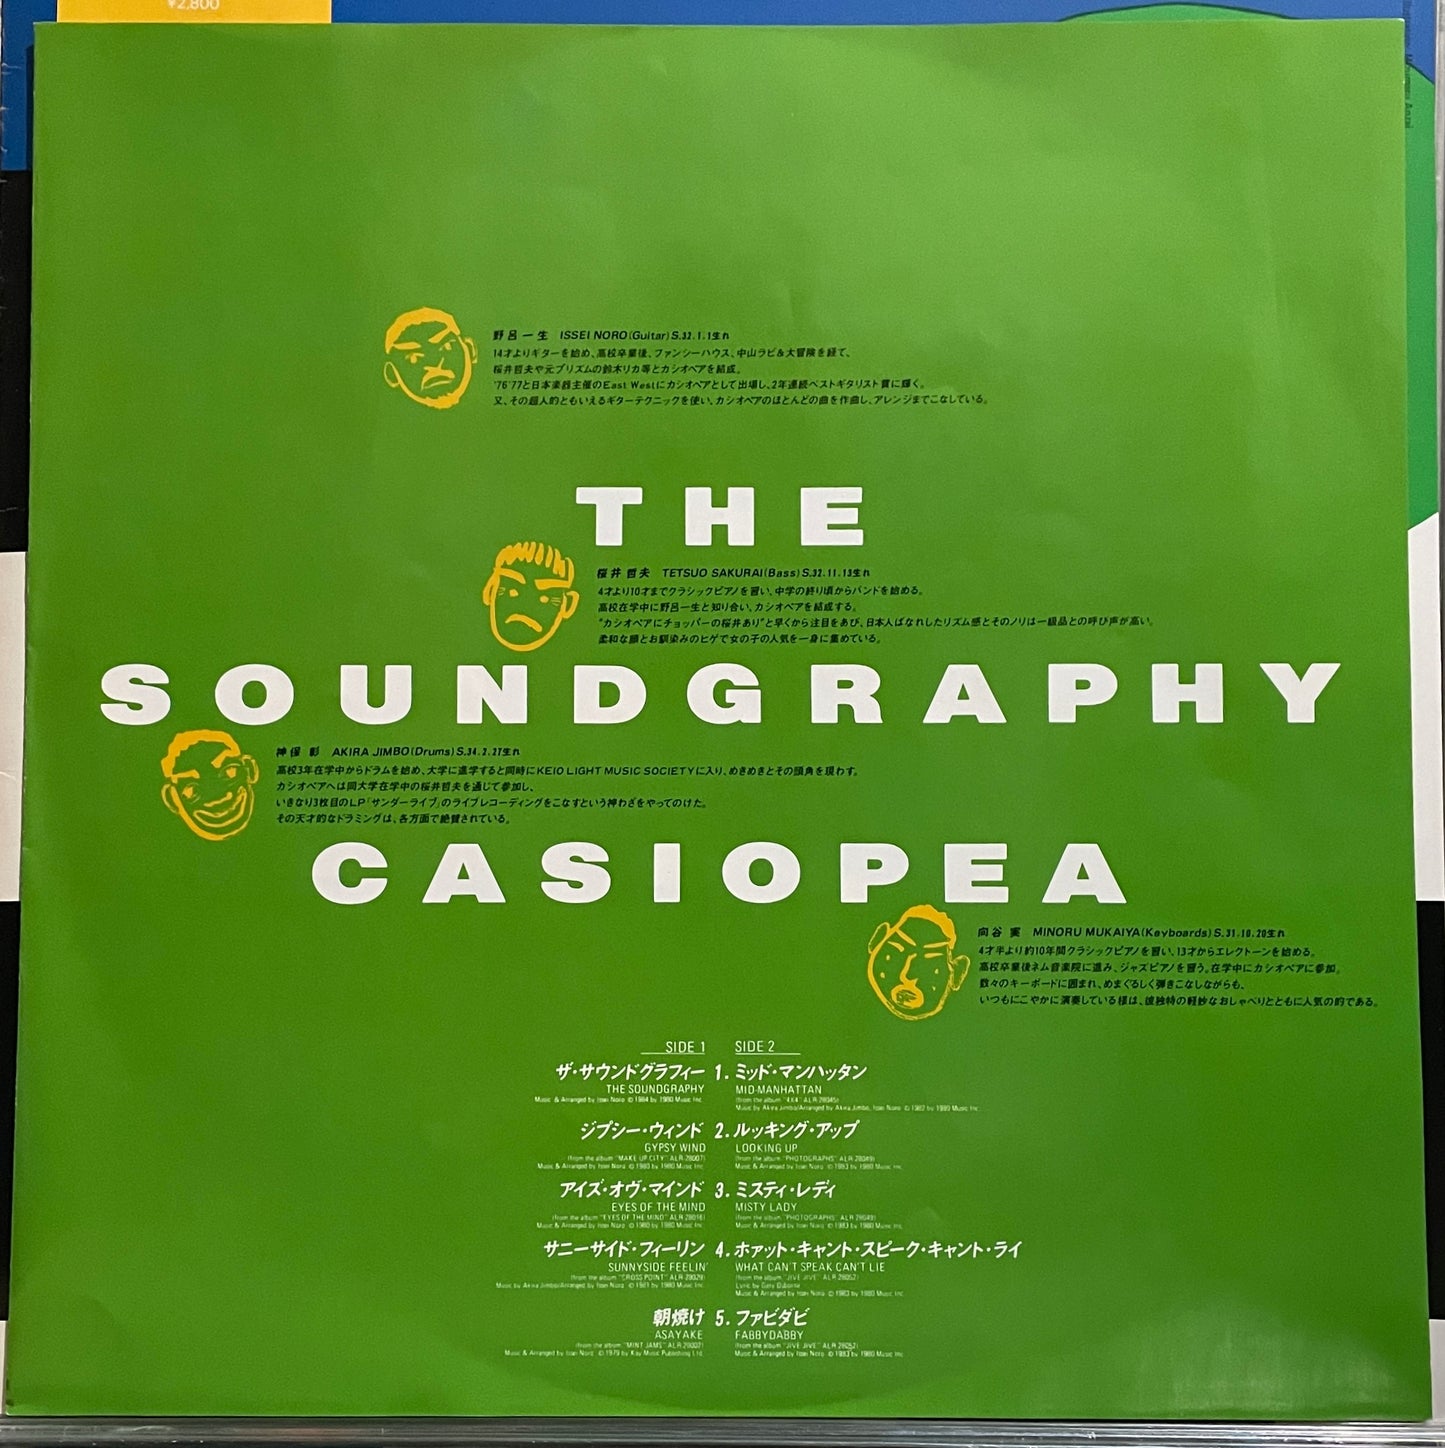 Casiopea “The Soundography” (1984)